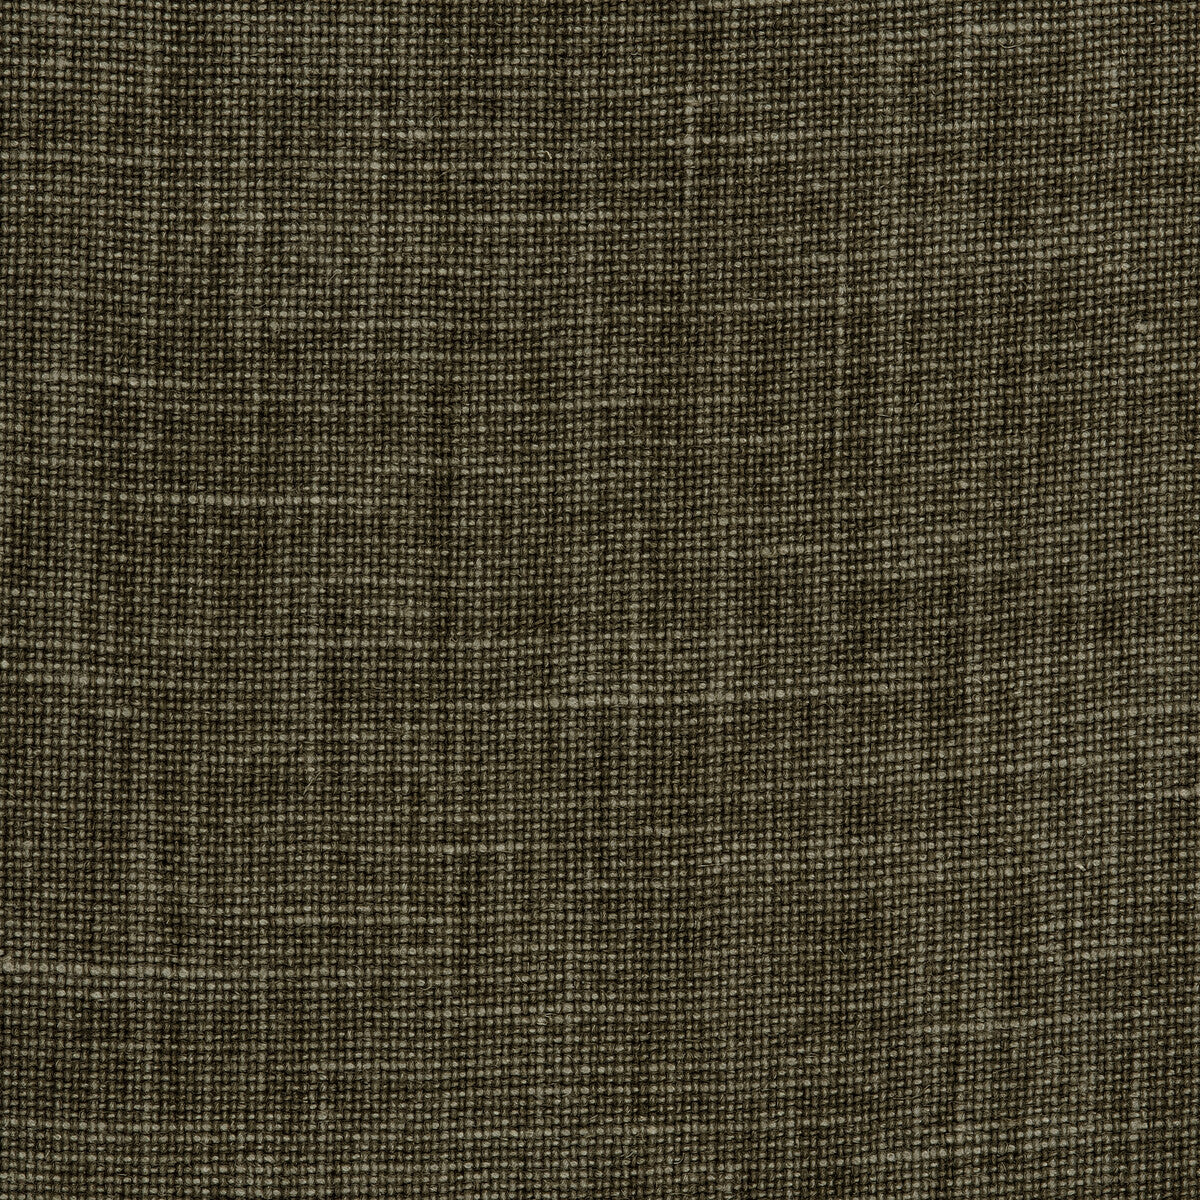 Weathered Linen fabric in woodsmoke color - pattern BF10962.935.0 - by G P &amp; J Baker in the Baker House Linens collection